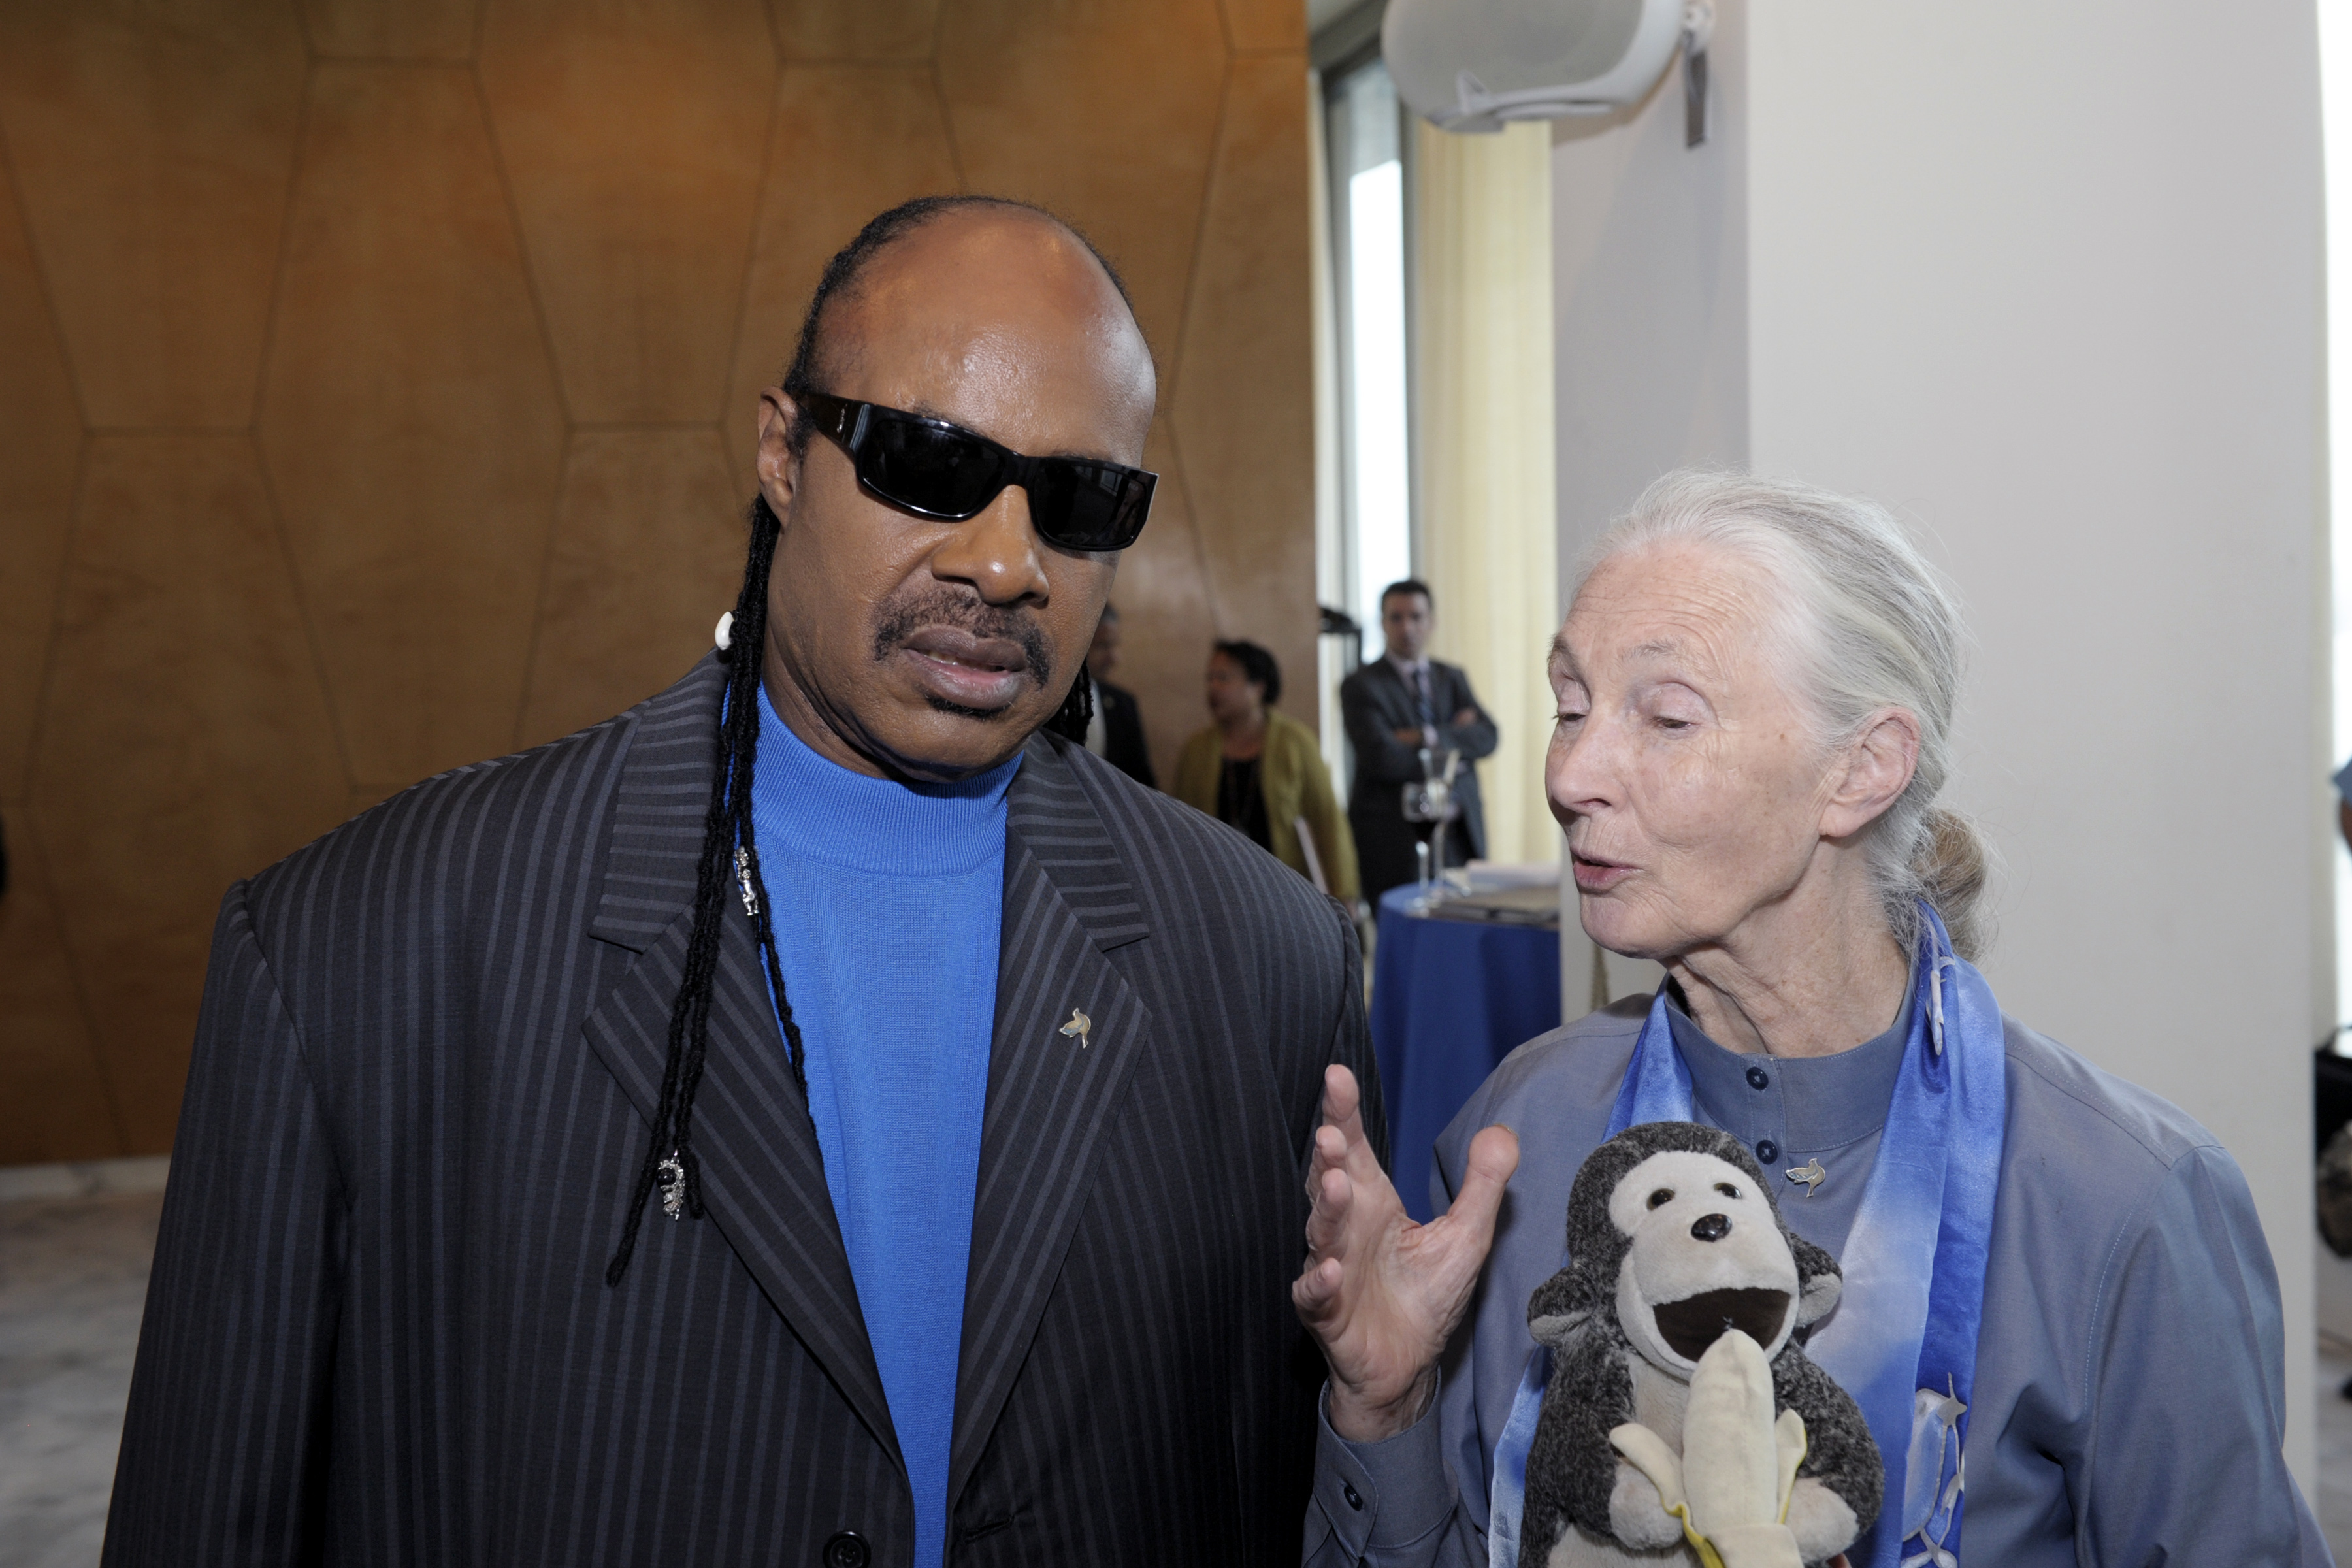 UN Messengers of Peace Stevie Wonder and Jane Goodall, chat at a luncheon hosted by former Secretary-General at UN Headquarters.15 September 2011. United Nations, New York/UN Photo/Eskinder Debebe